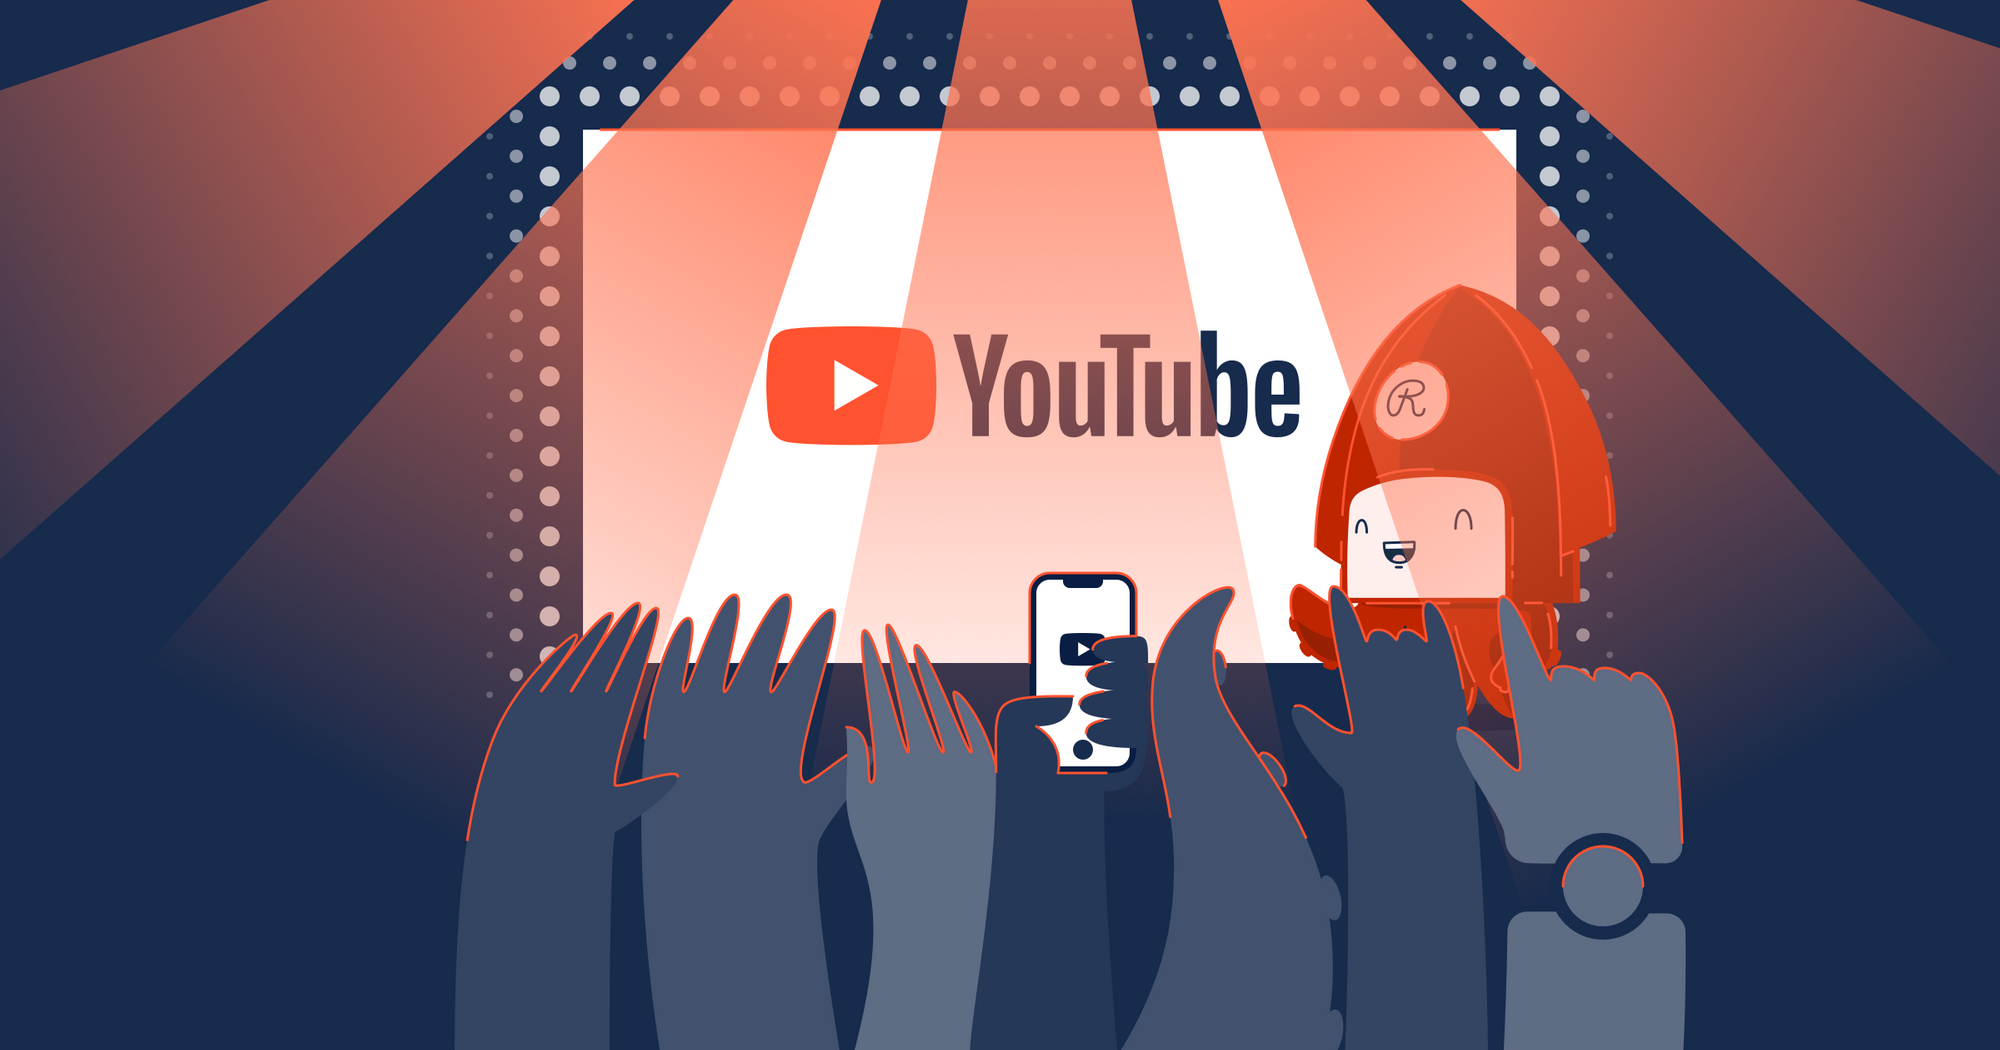 Pre-plan YouTube events